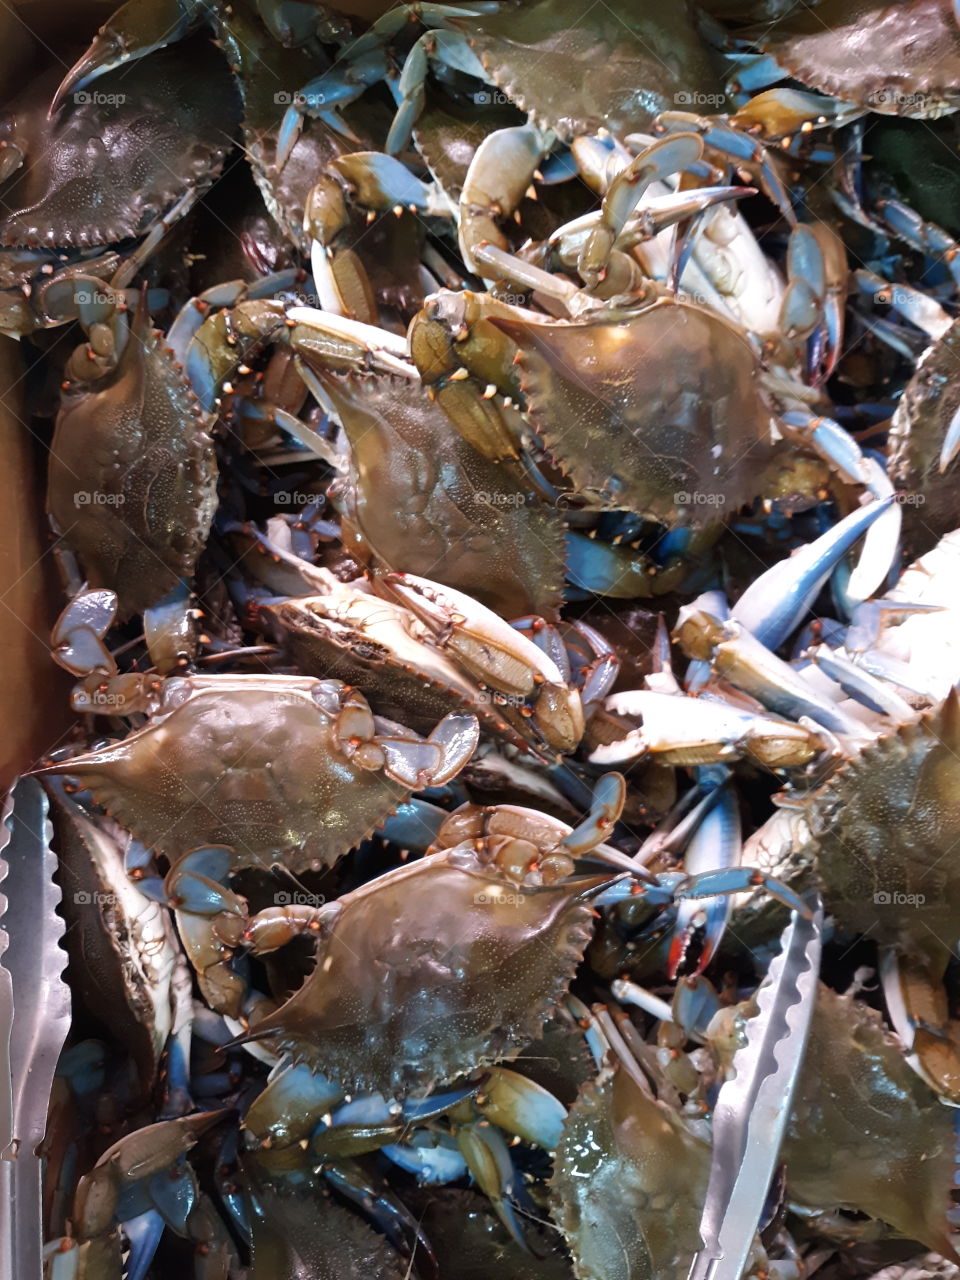 Blue crabs on display, healthy and clean.